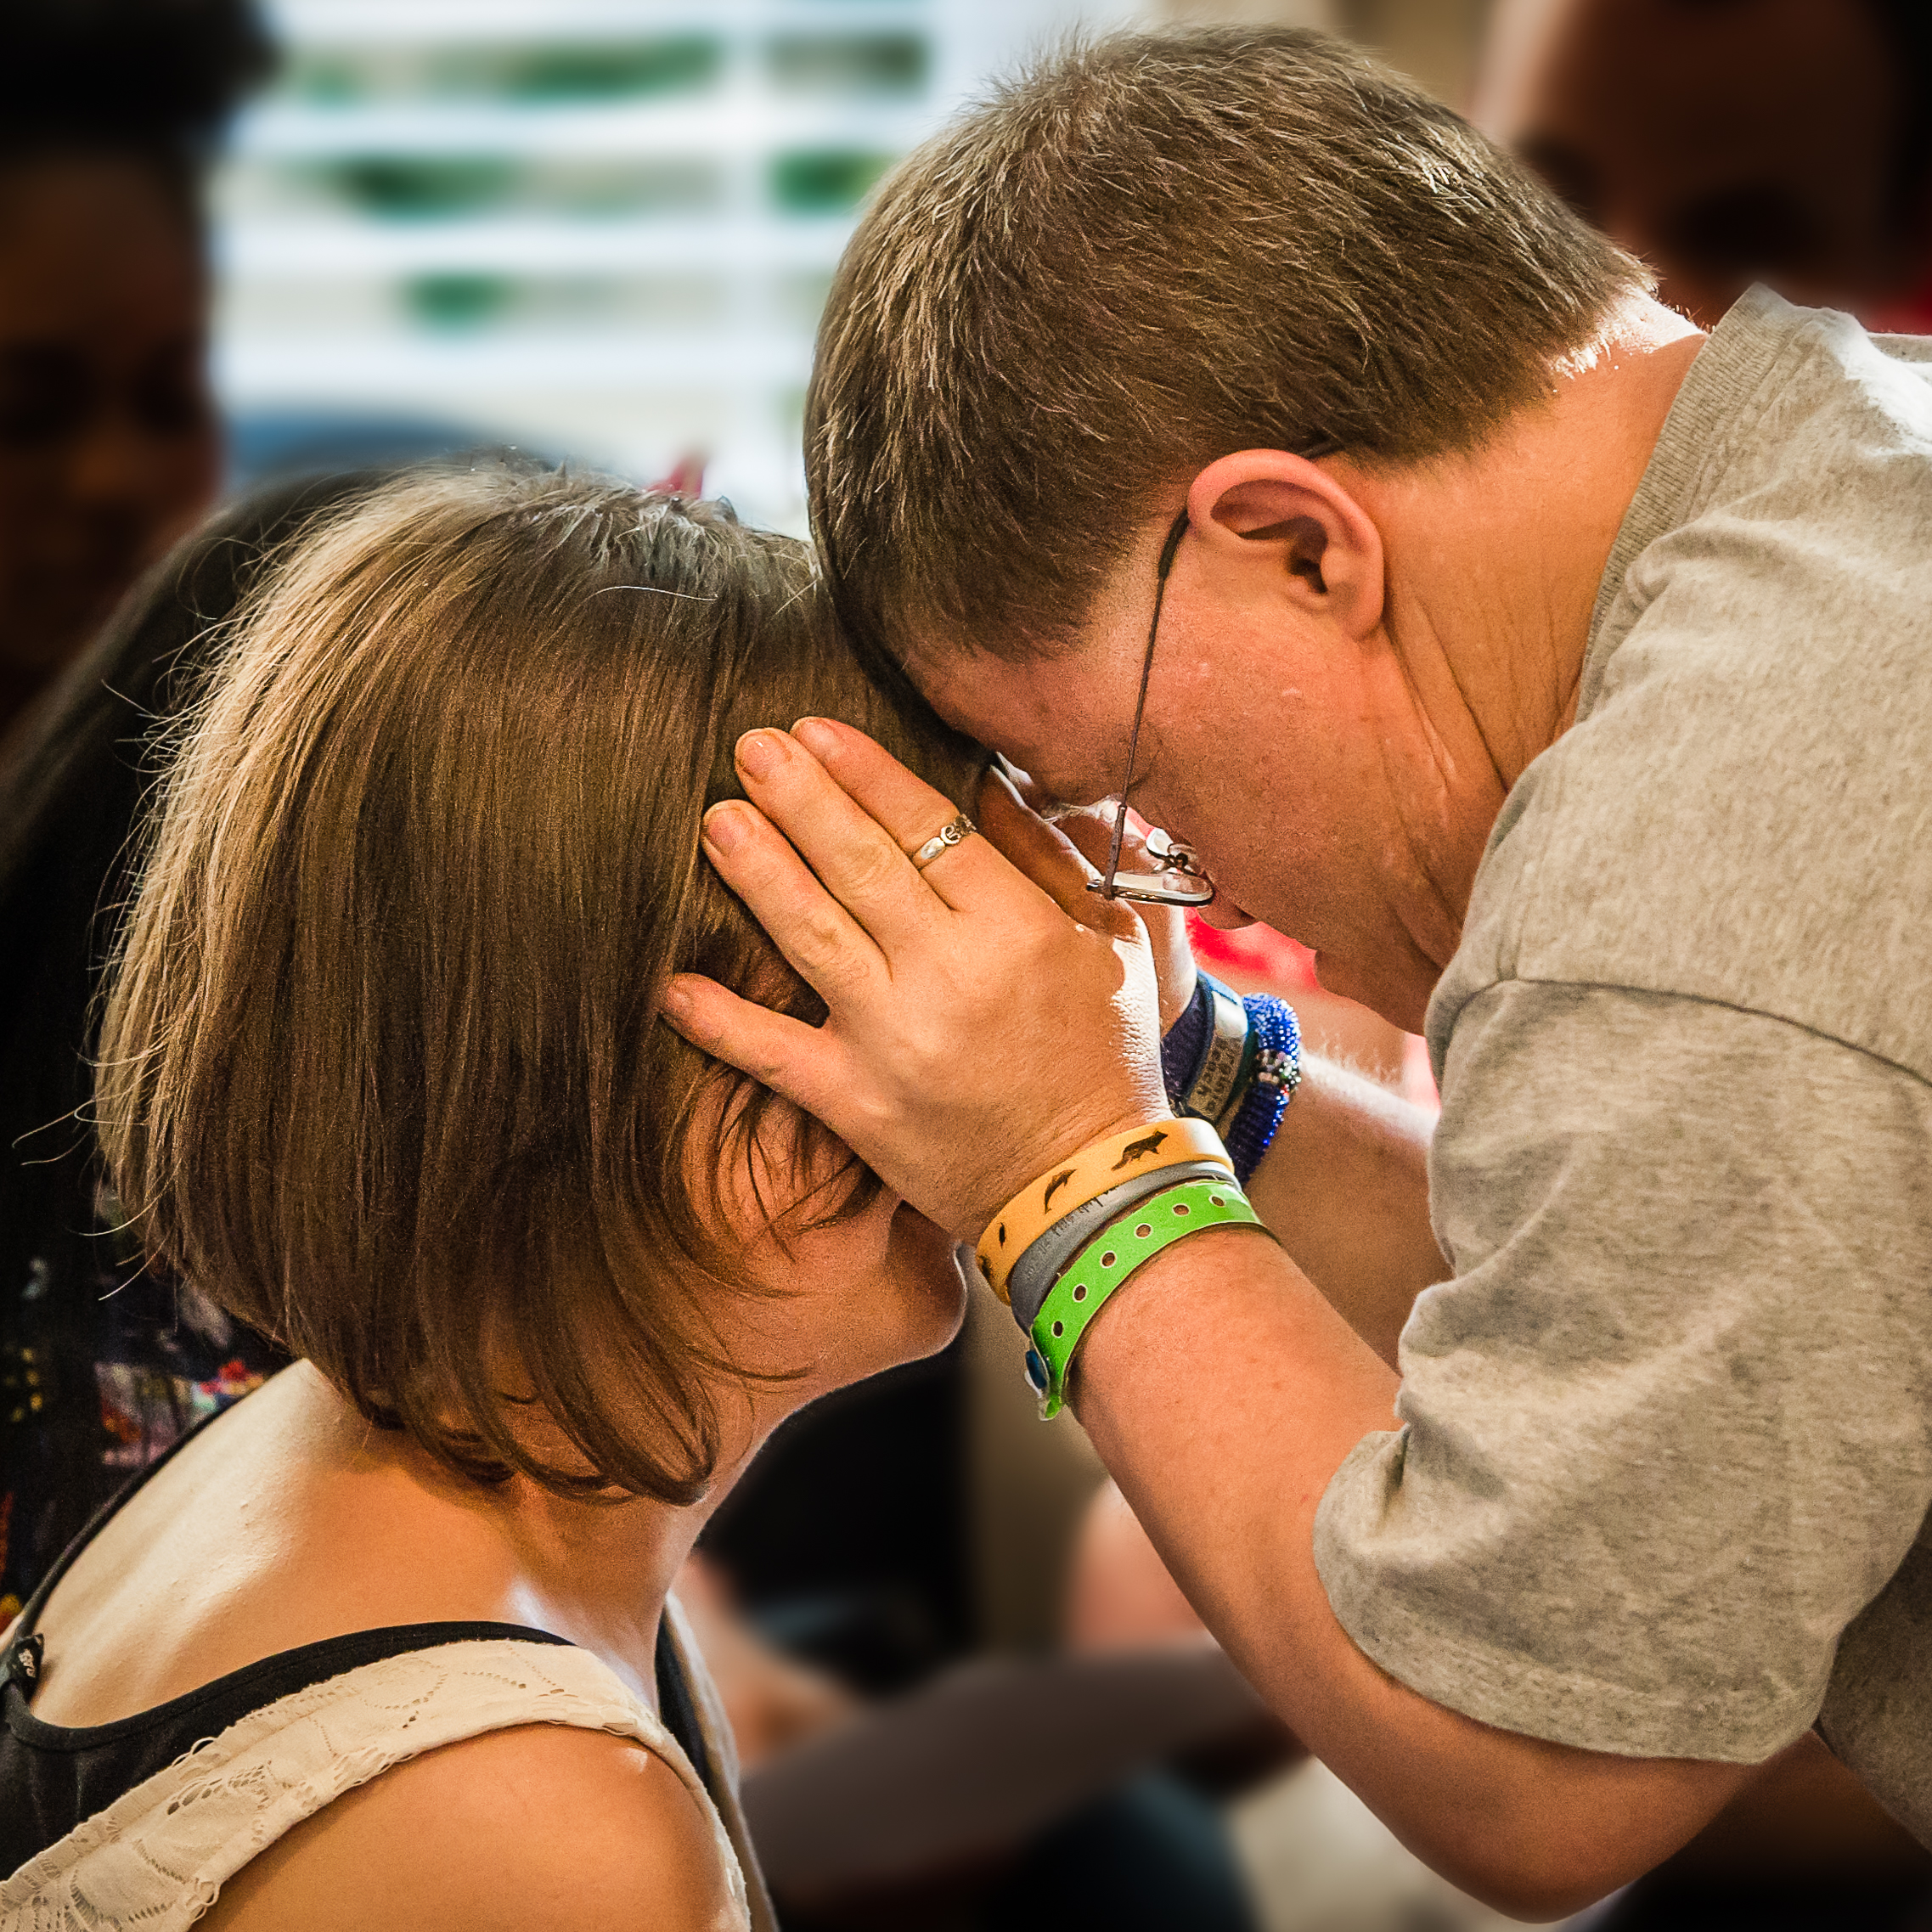 A man puts his hands and forehead against a woman's forehead to bless her.